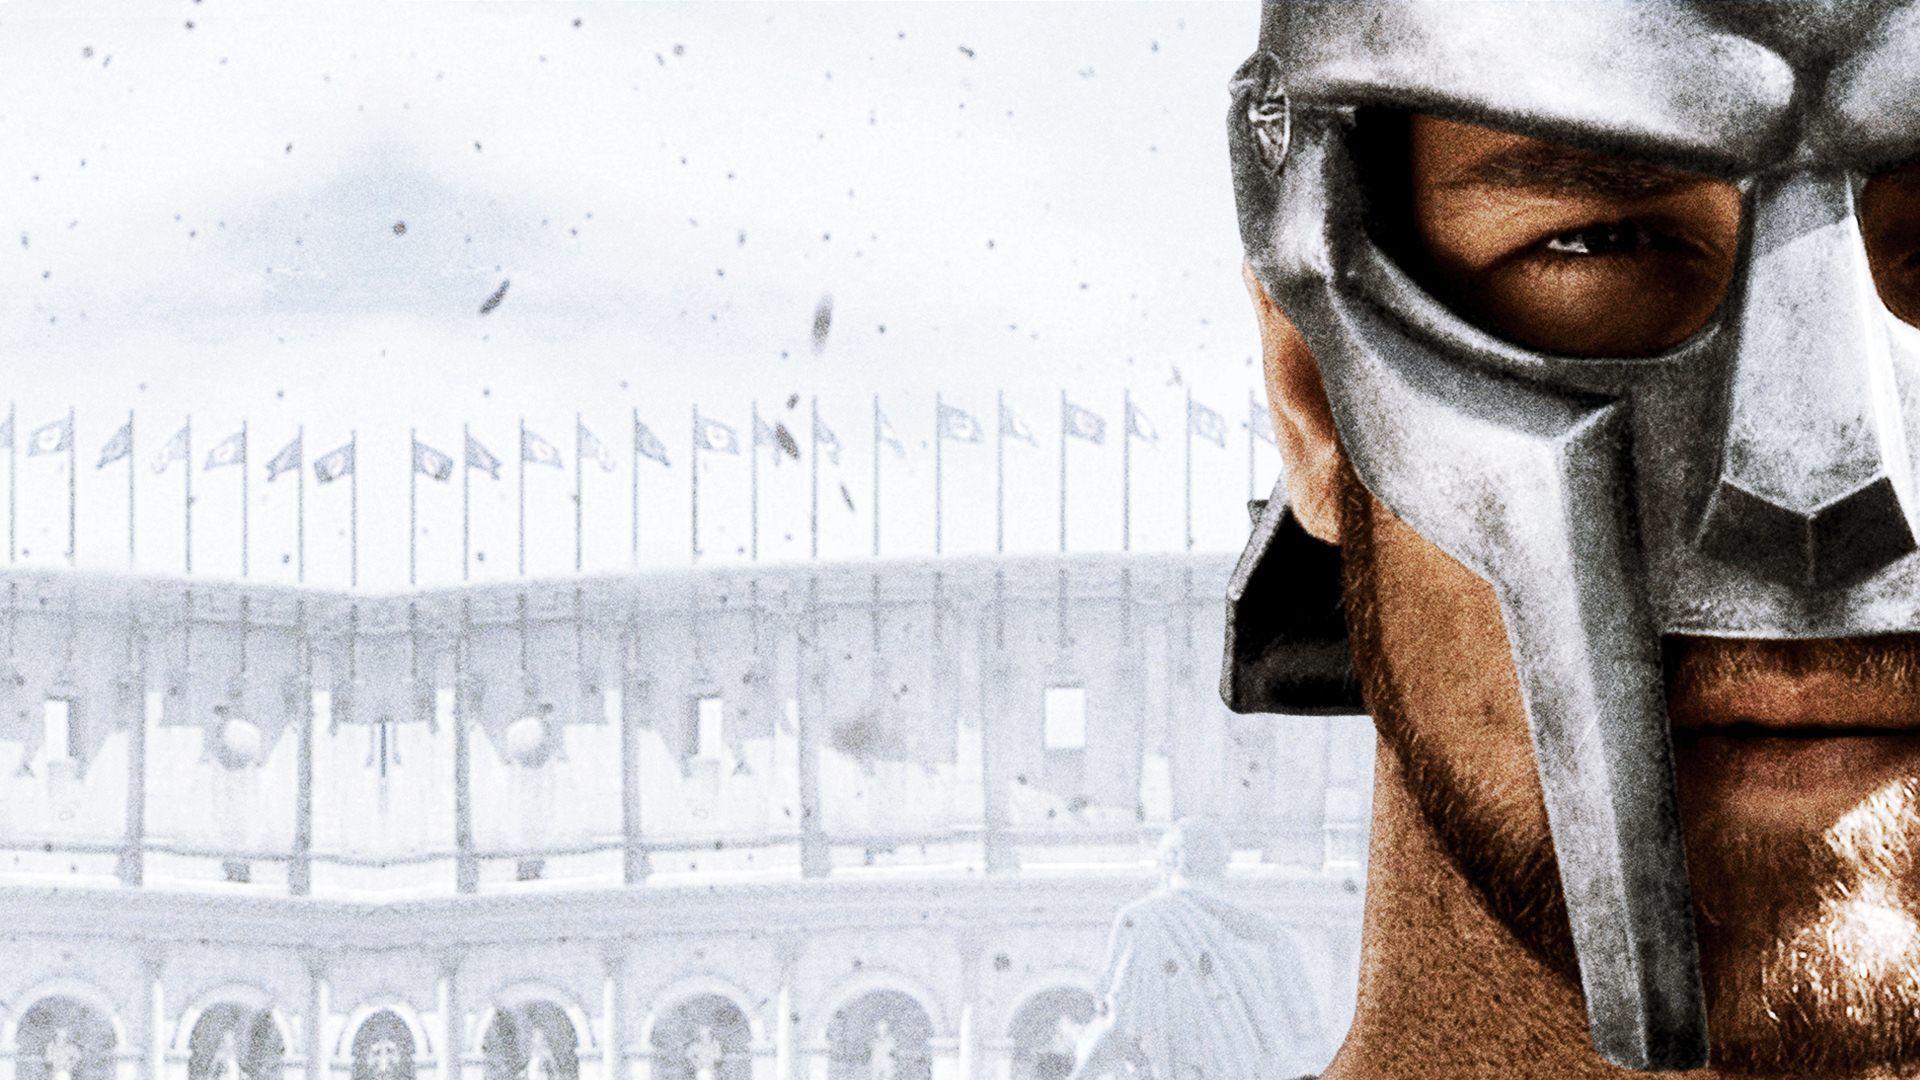 Gladiator Free Download Wallpaper. Download High Quality